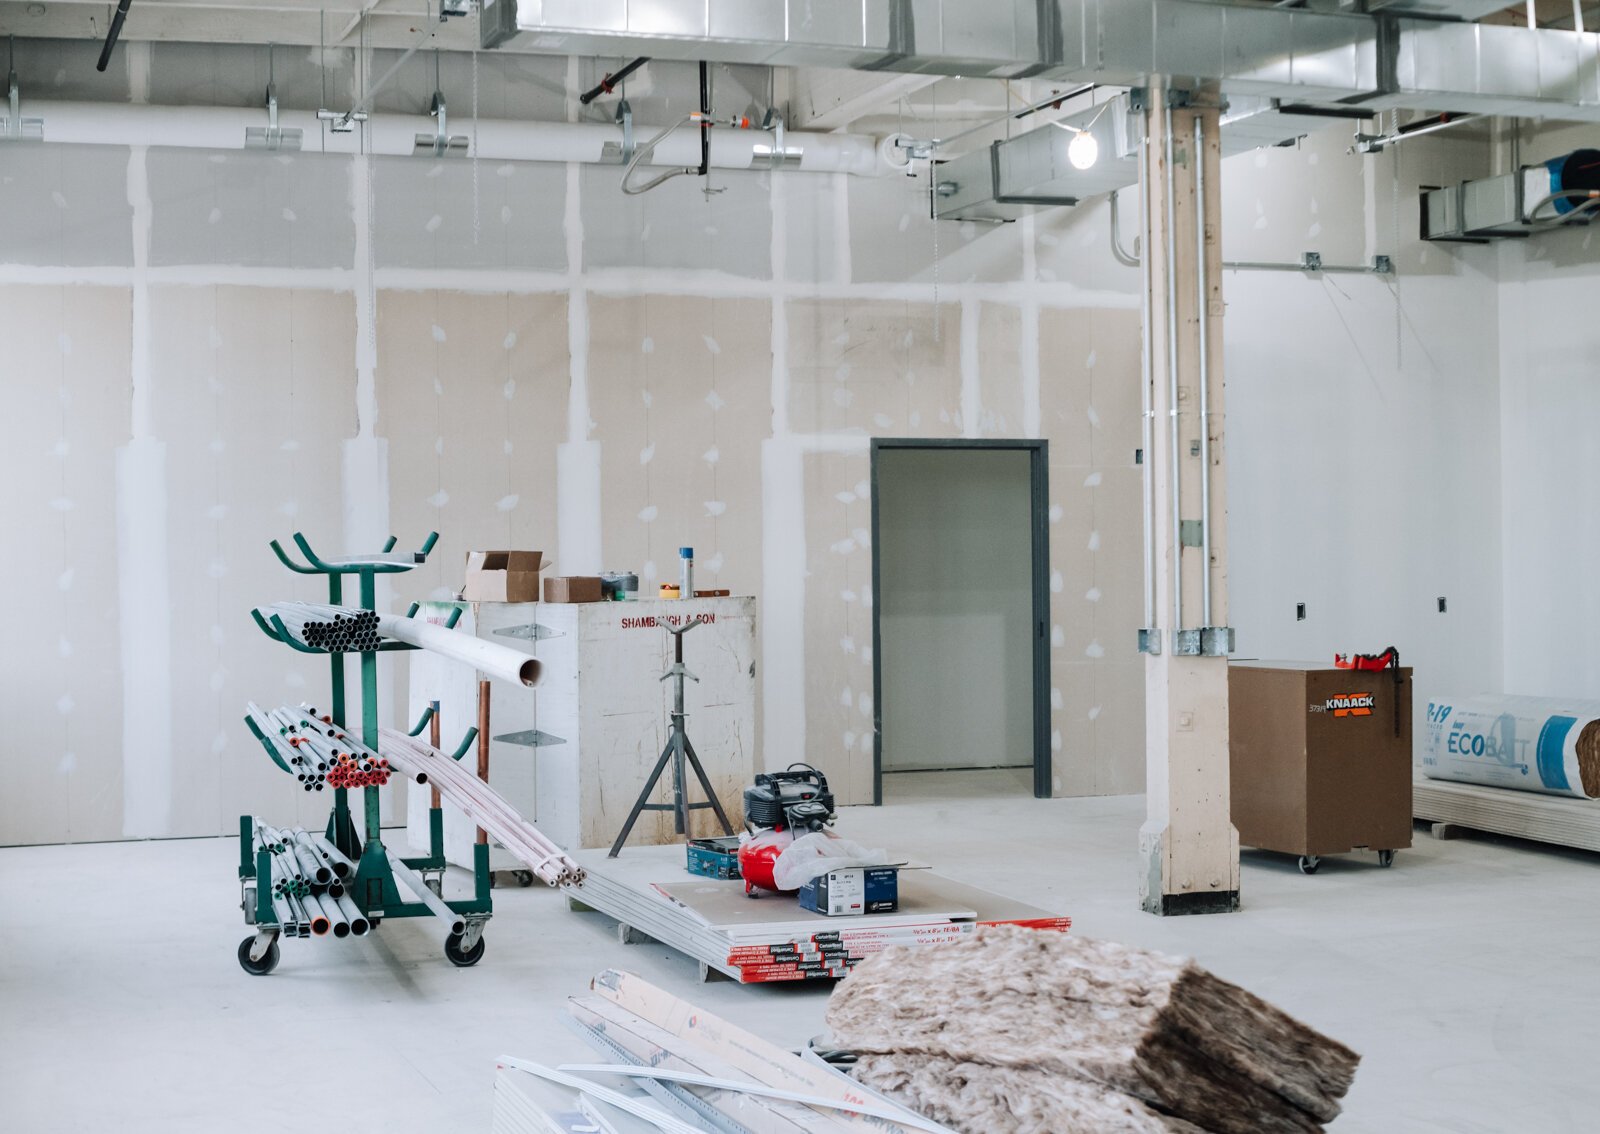 The future space of the Fort Wayne Community Schools Amp Lab inside Building 31 on the West Campus of Electric Works. (December 2021)